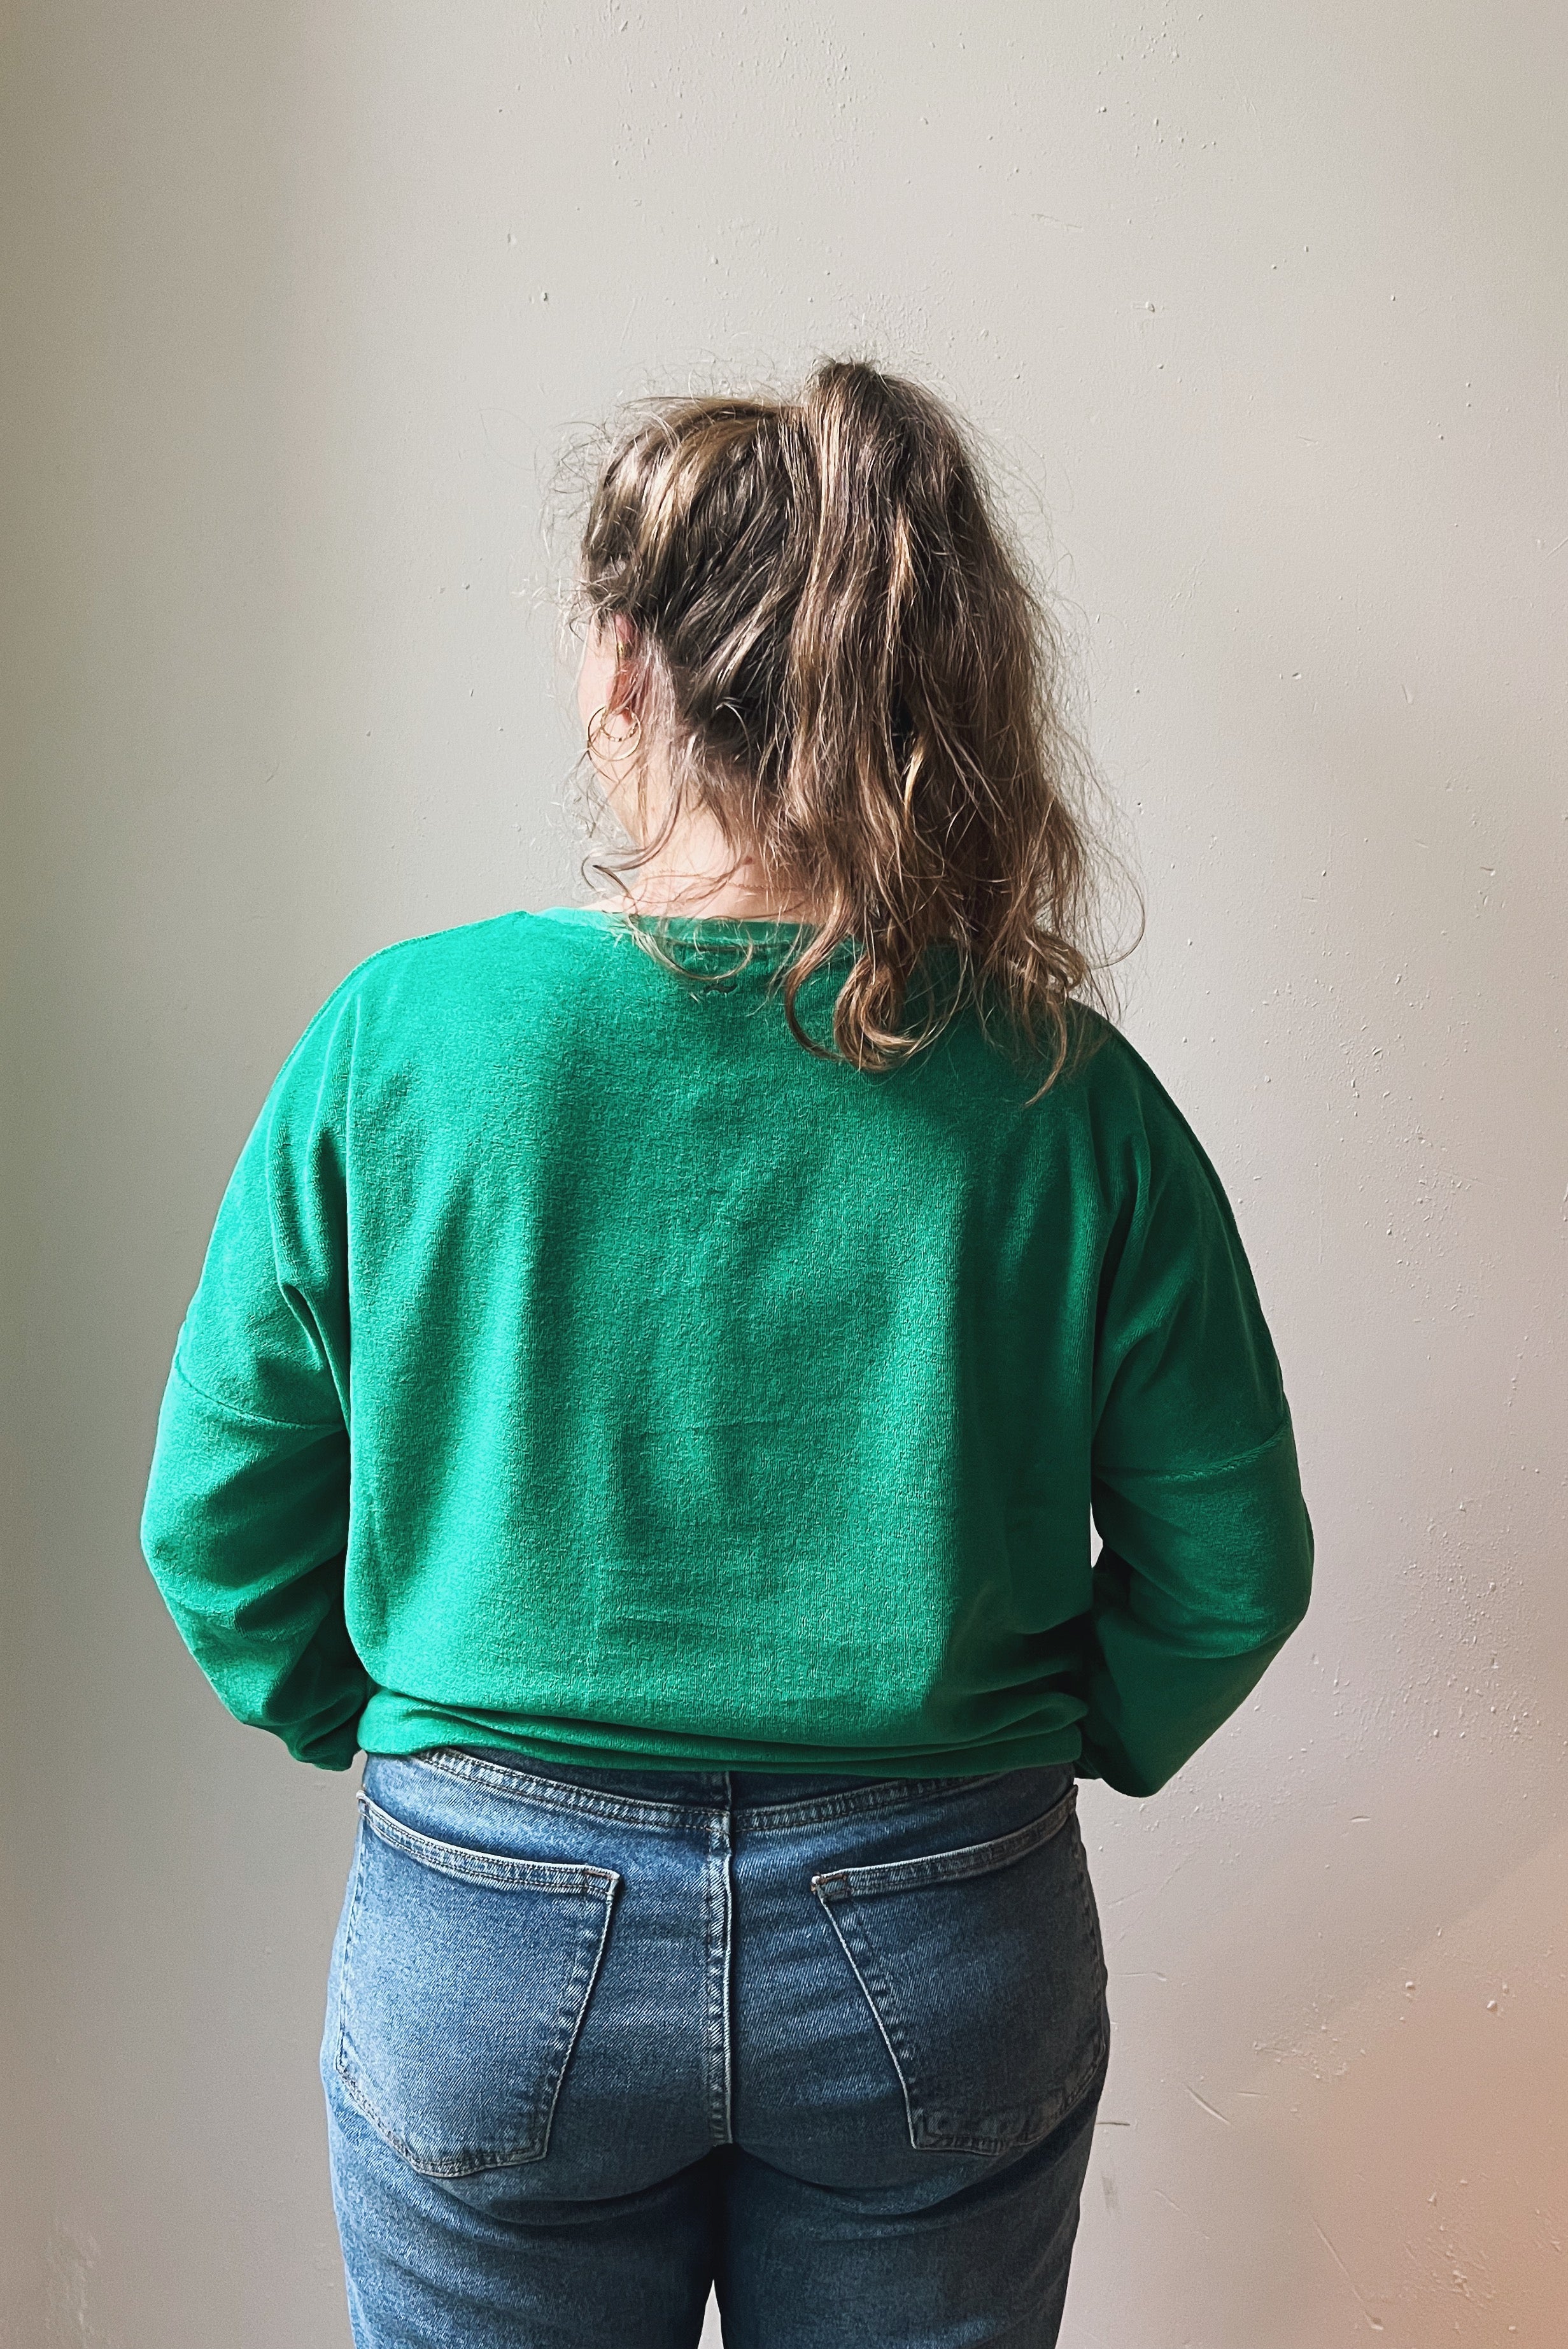 the dão store - Sweater Isa - Jelly Bean Green Terry - Sweaters | Hoodies